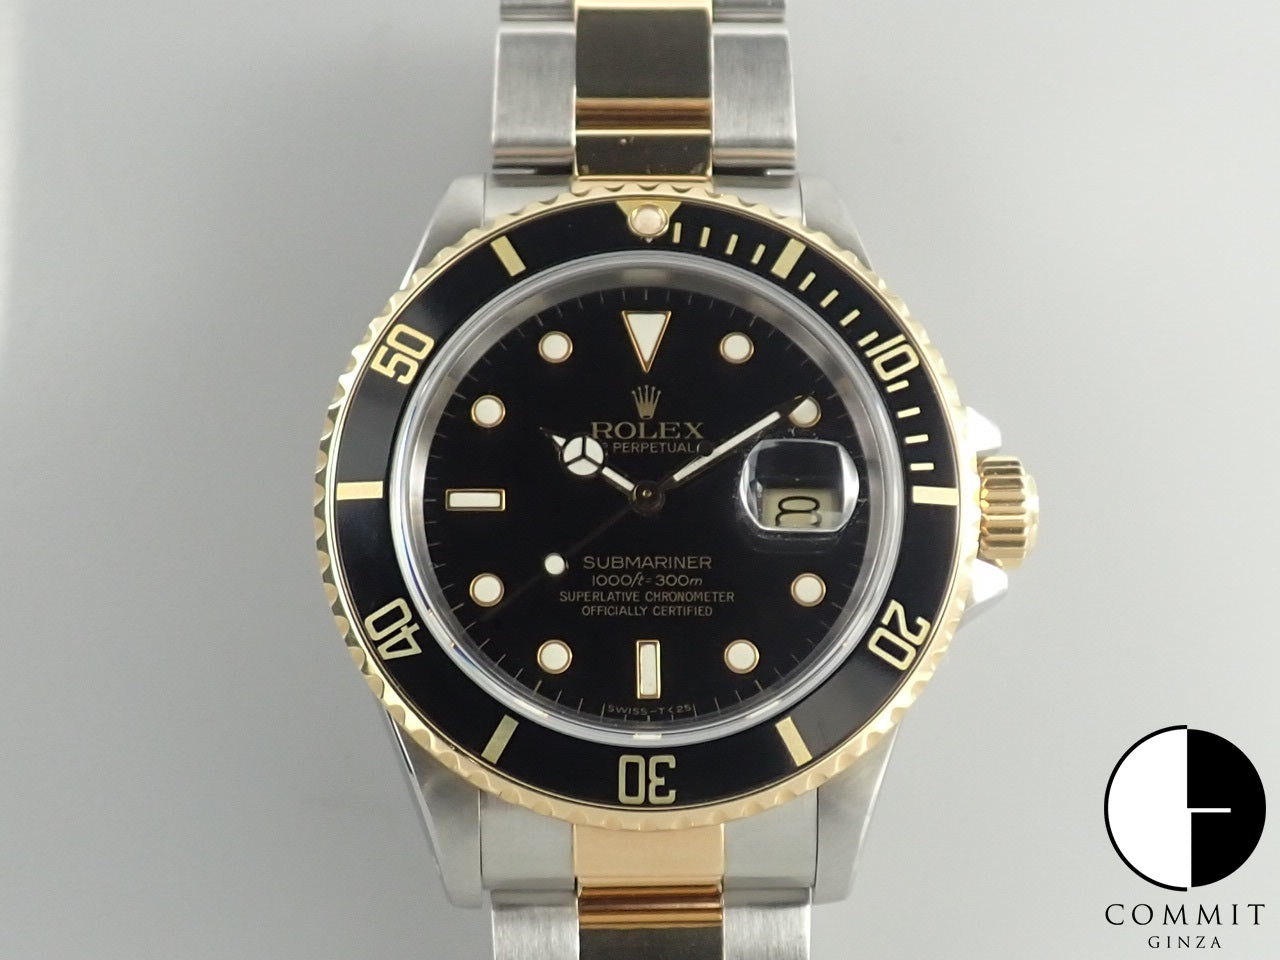 Rolex Submariner &lt;Warranty box and other items&gt;